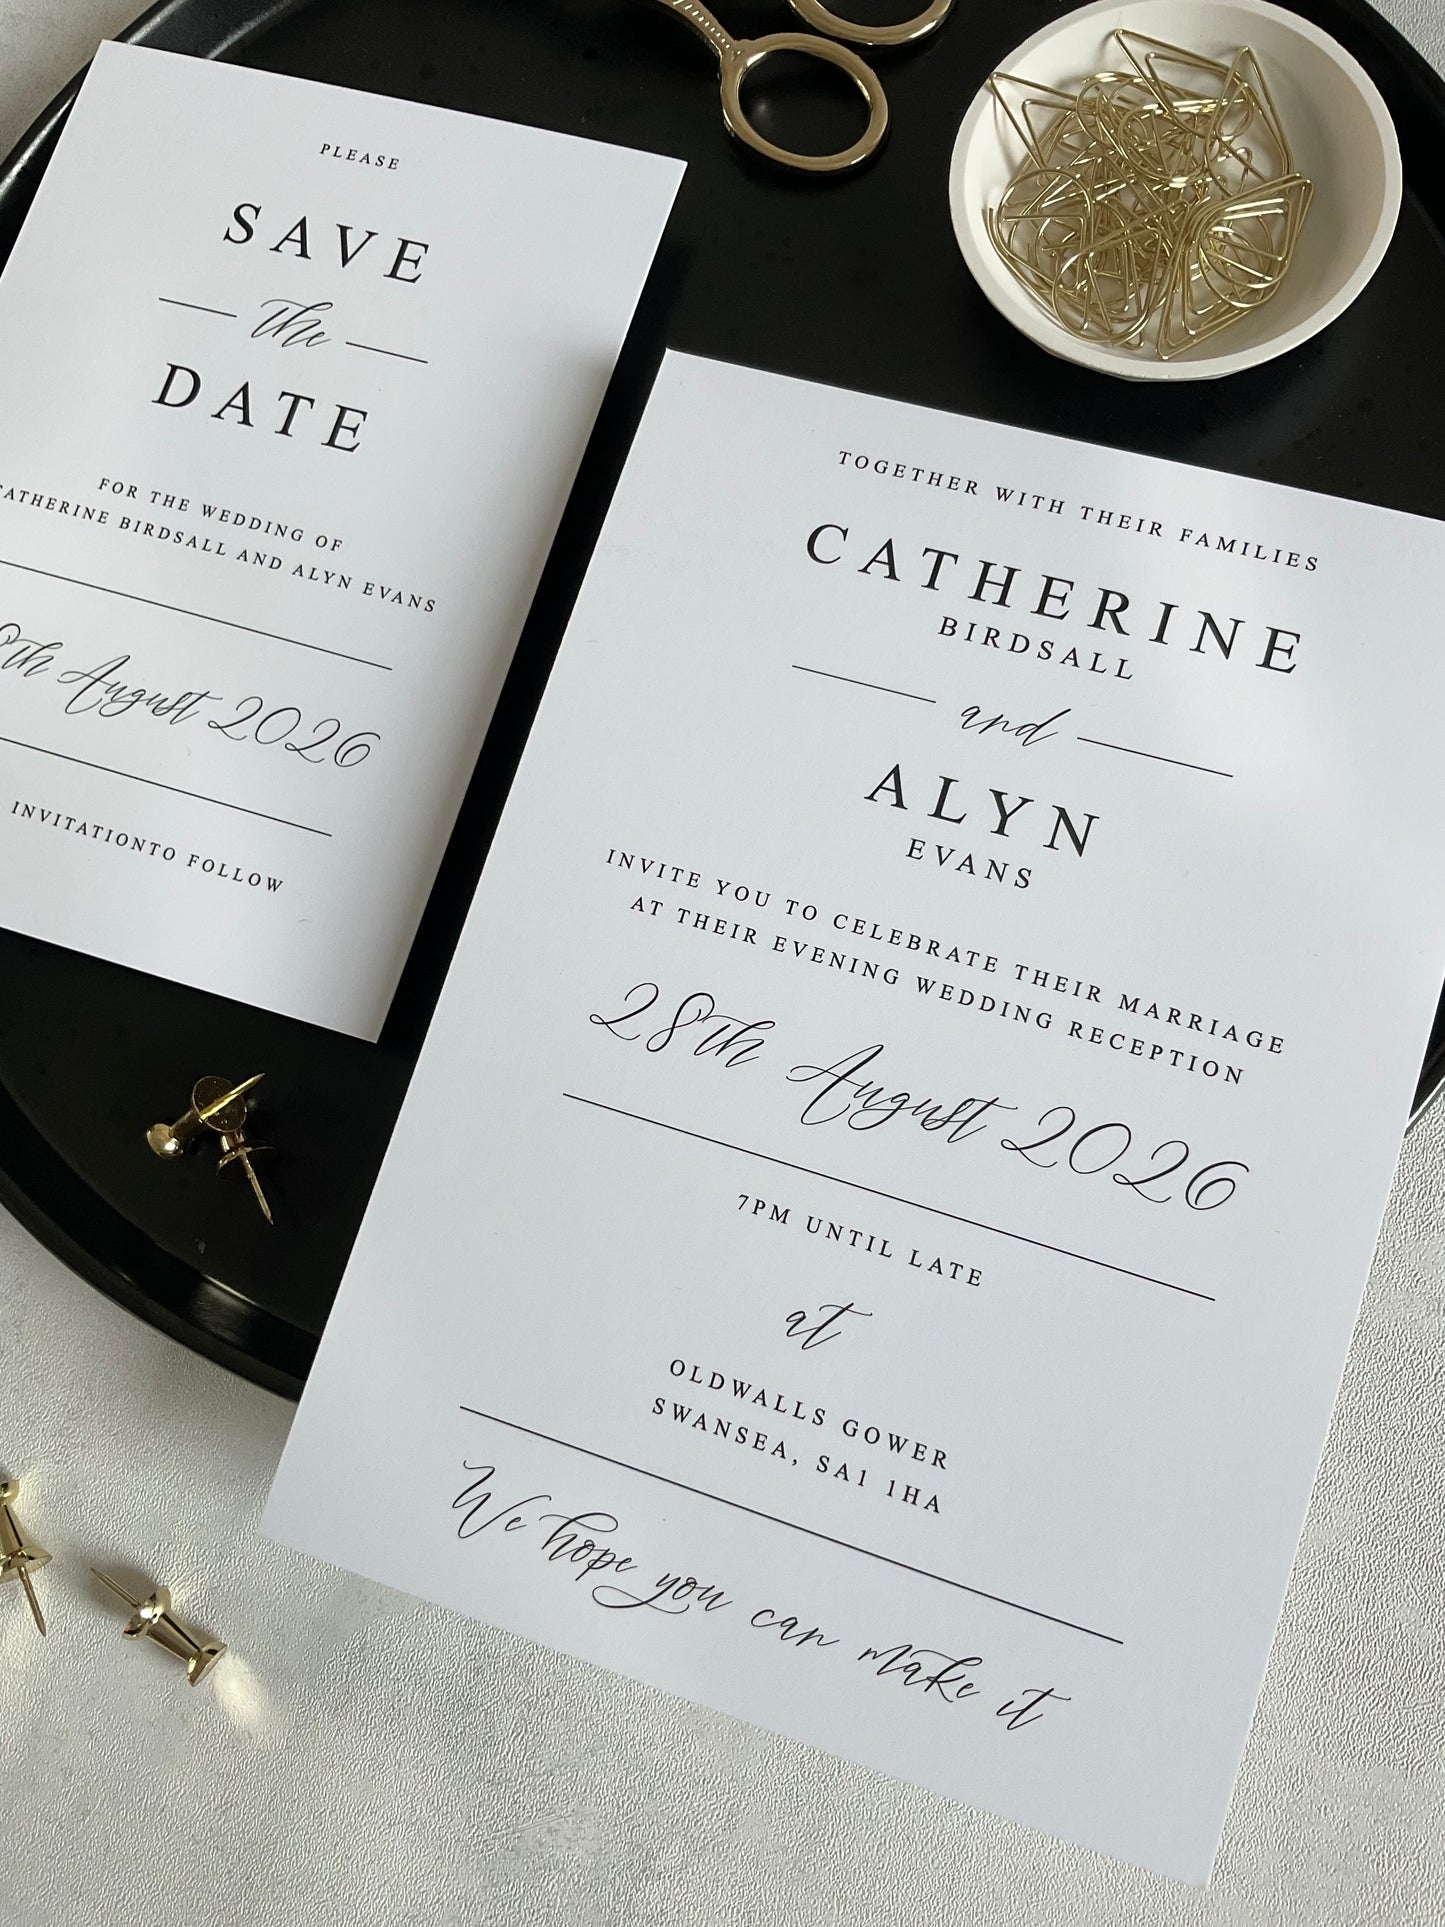 Catherine Save the Date card